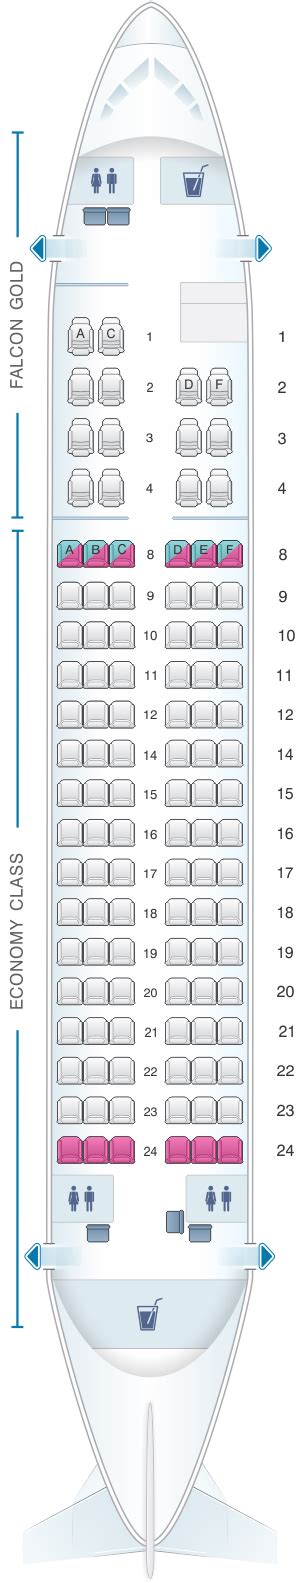 Airbus A320 Seat Map United